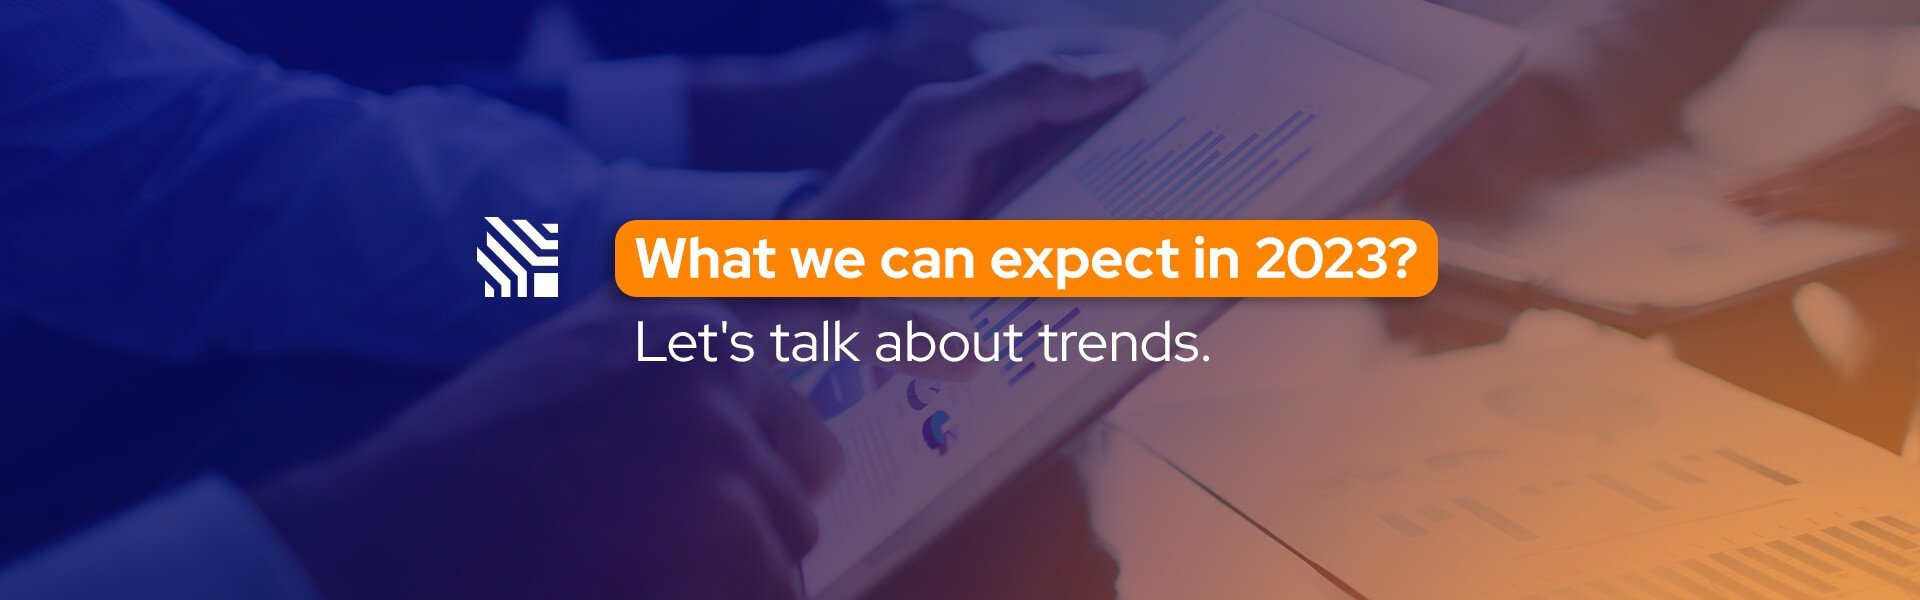 What we can expect in 2023? Let’s talk about trends